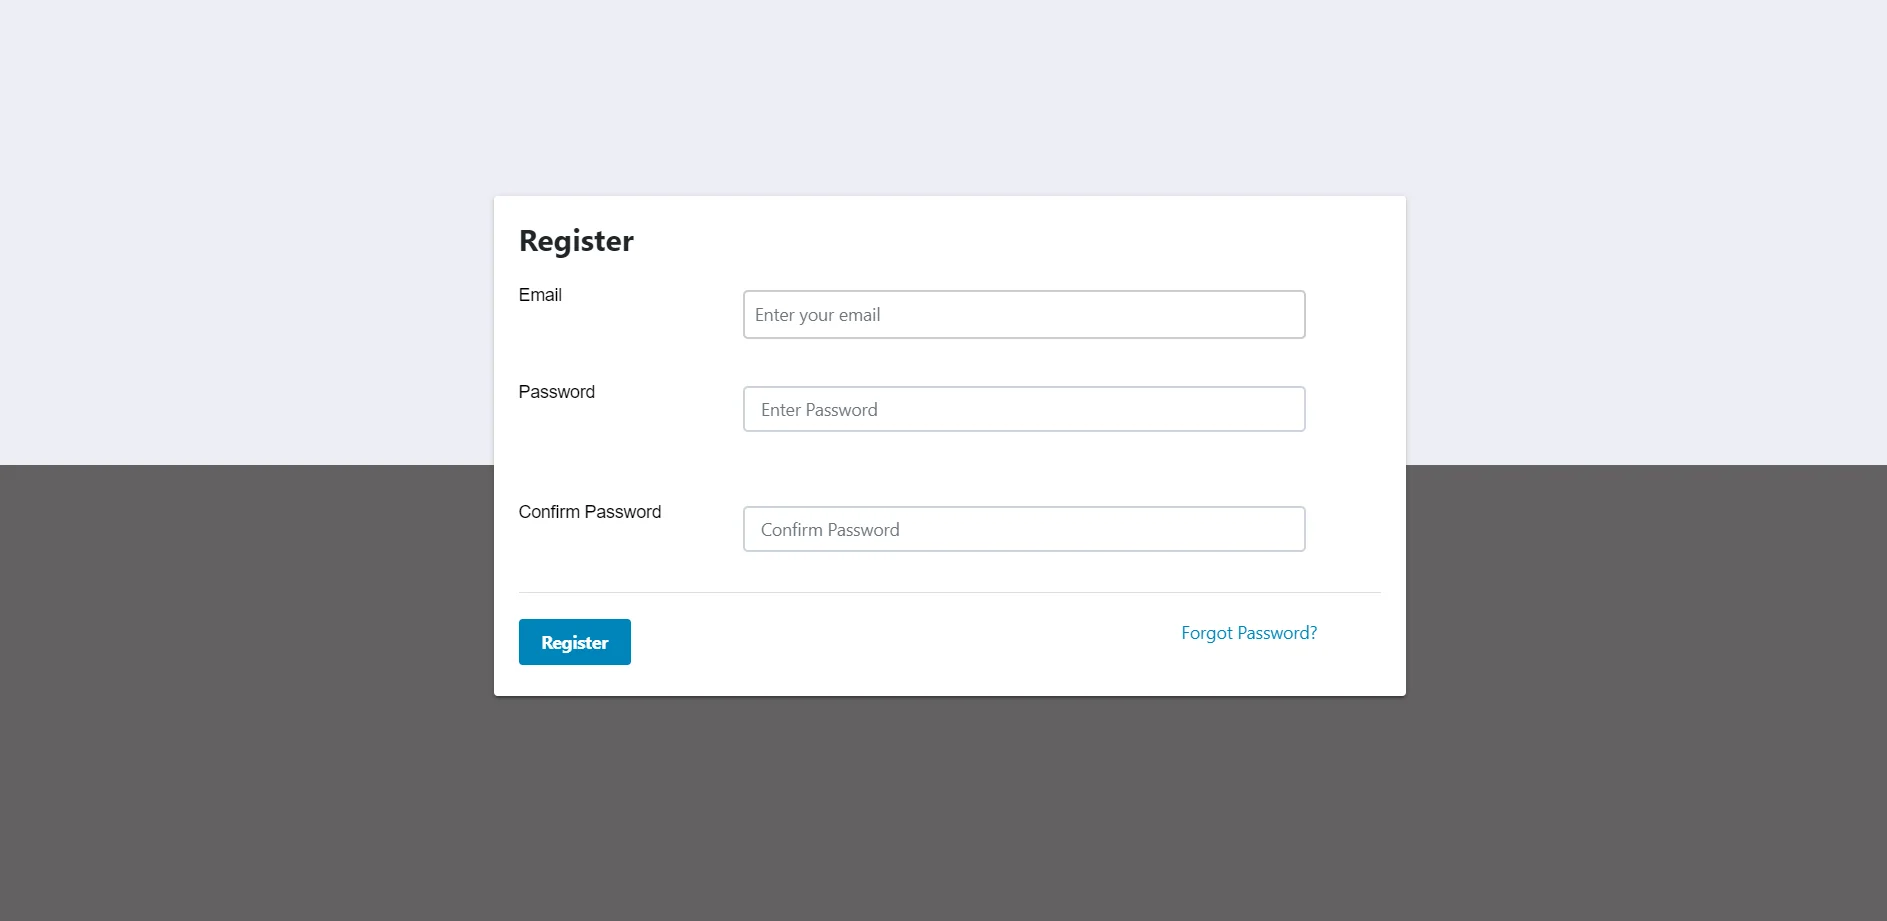 Umbraco Single Sign-On (SSO) using Google Apps as IDP - Login Page